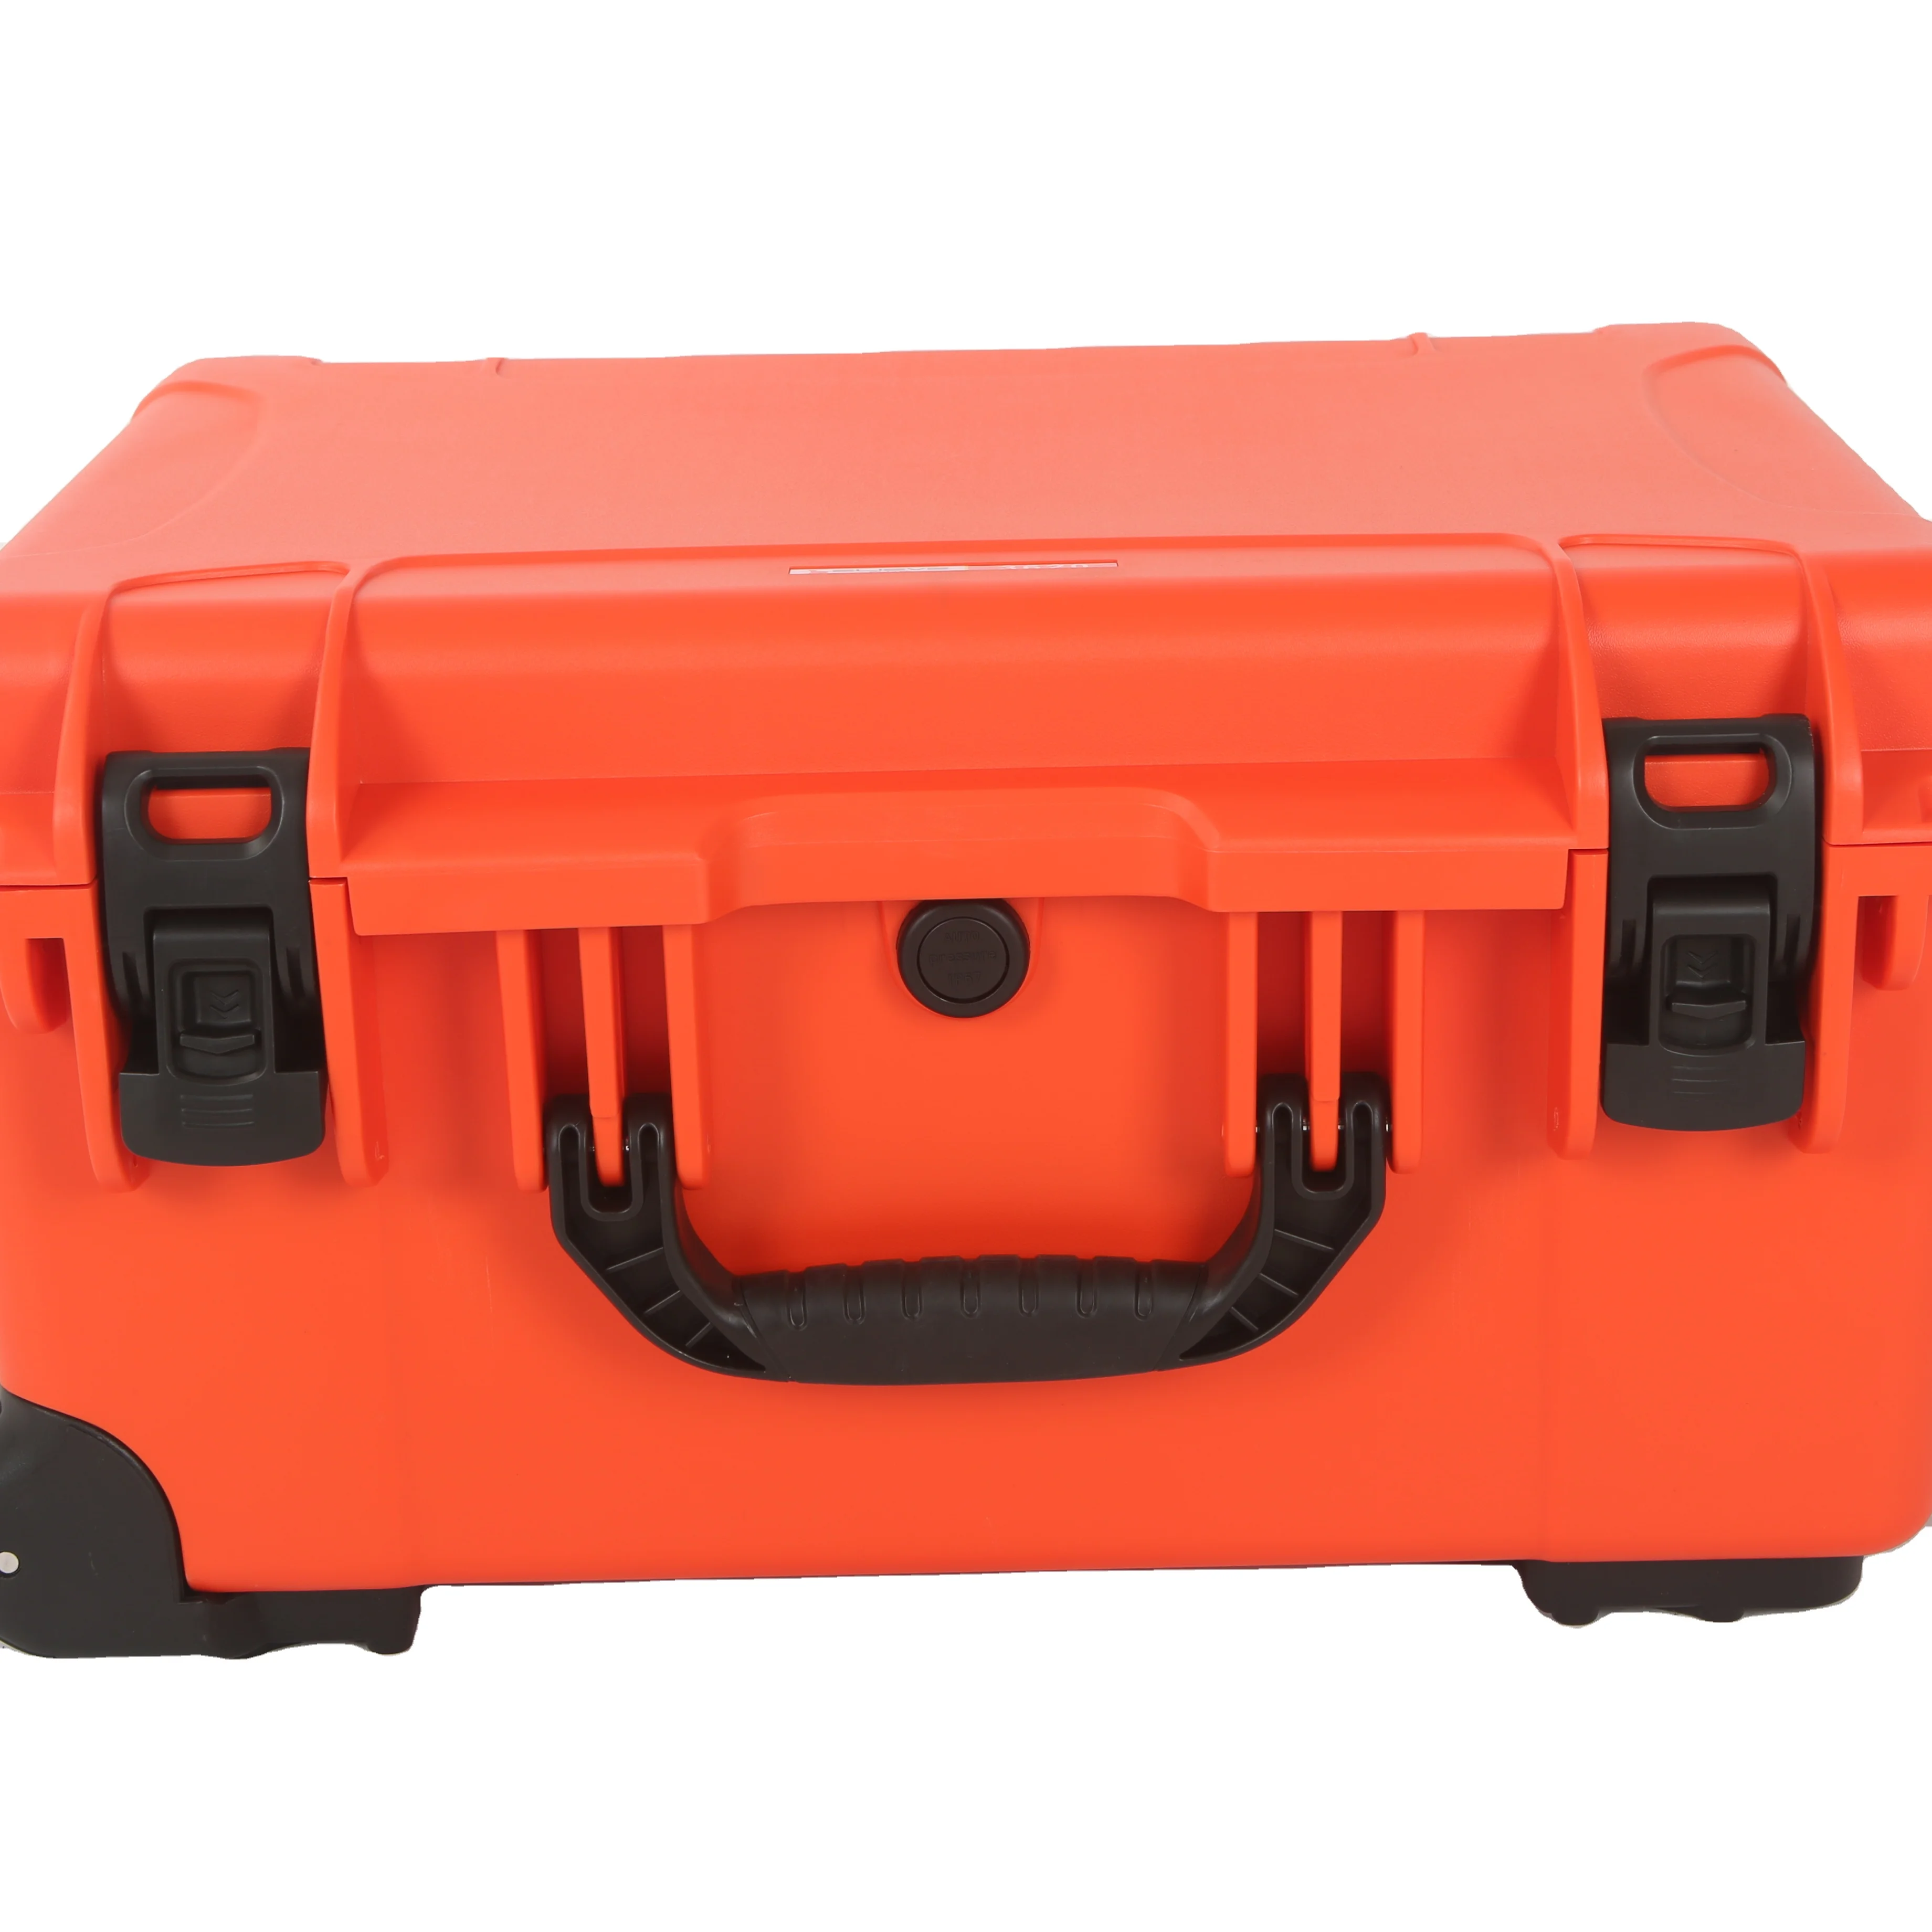 Strong Hard Plastic Case Equipment instrument Tool Protection Case Bag Box